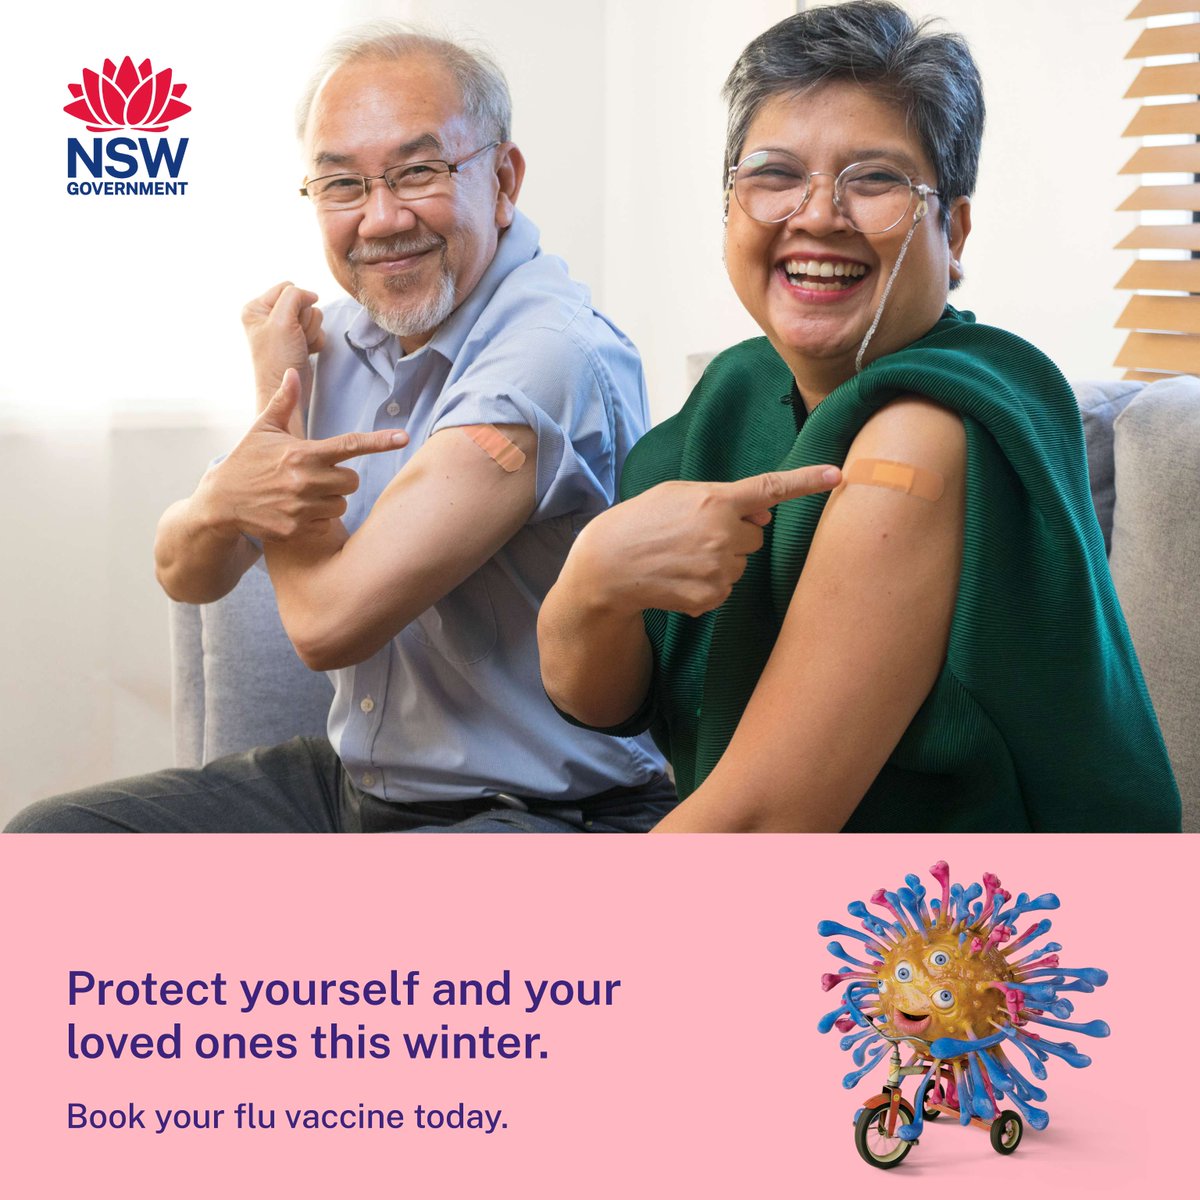 Influenza (flu) is serious, especially for people aged 65 and over, but your yearly flu vaccine offers the best protection from getting really sick. Getting a flu vaccine is quick, easy and free for people aged 65 - book it today.